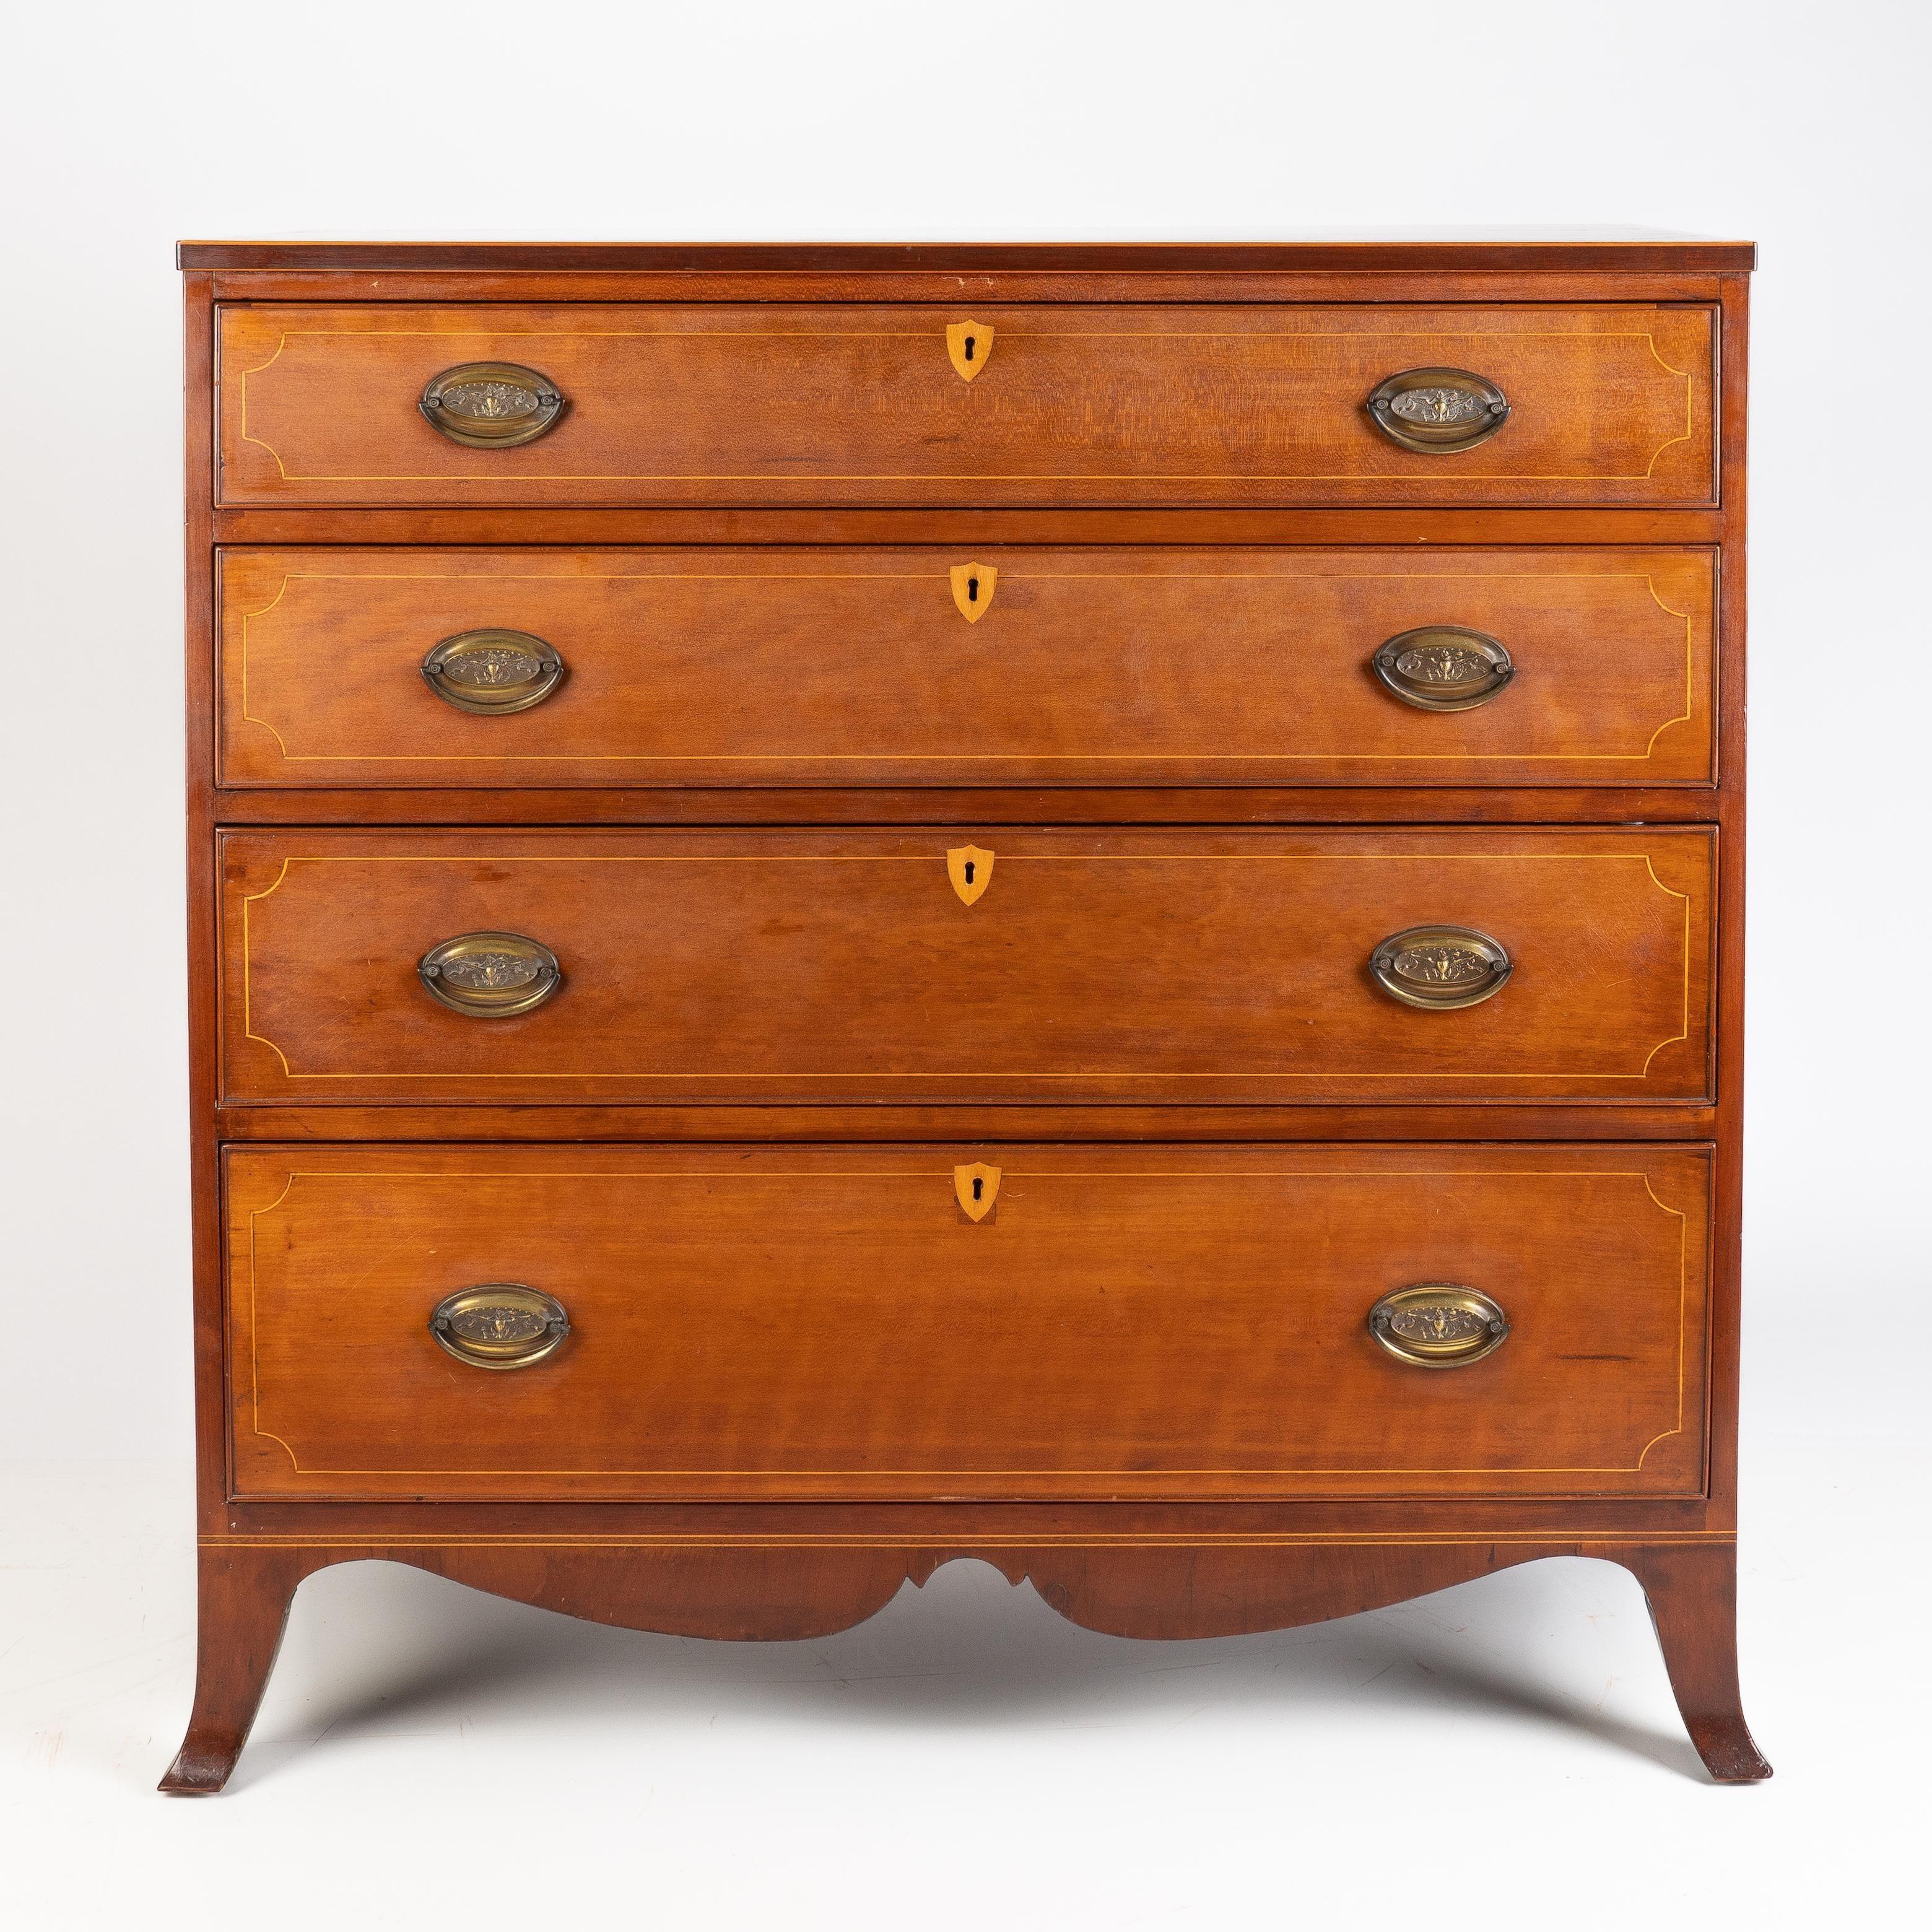 American Hepplewhite cherry chest on French bracket feet joined by a scolloped apron. The four drawer fronts are figured cherry inlaid with holy stringing and framed by a cock bead molding. The key escutcheons are defined by shield inlays of a light